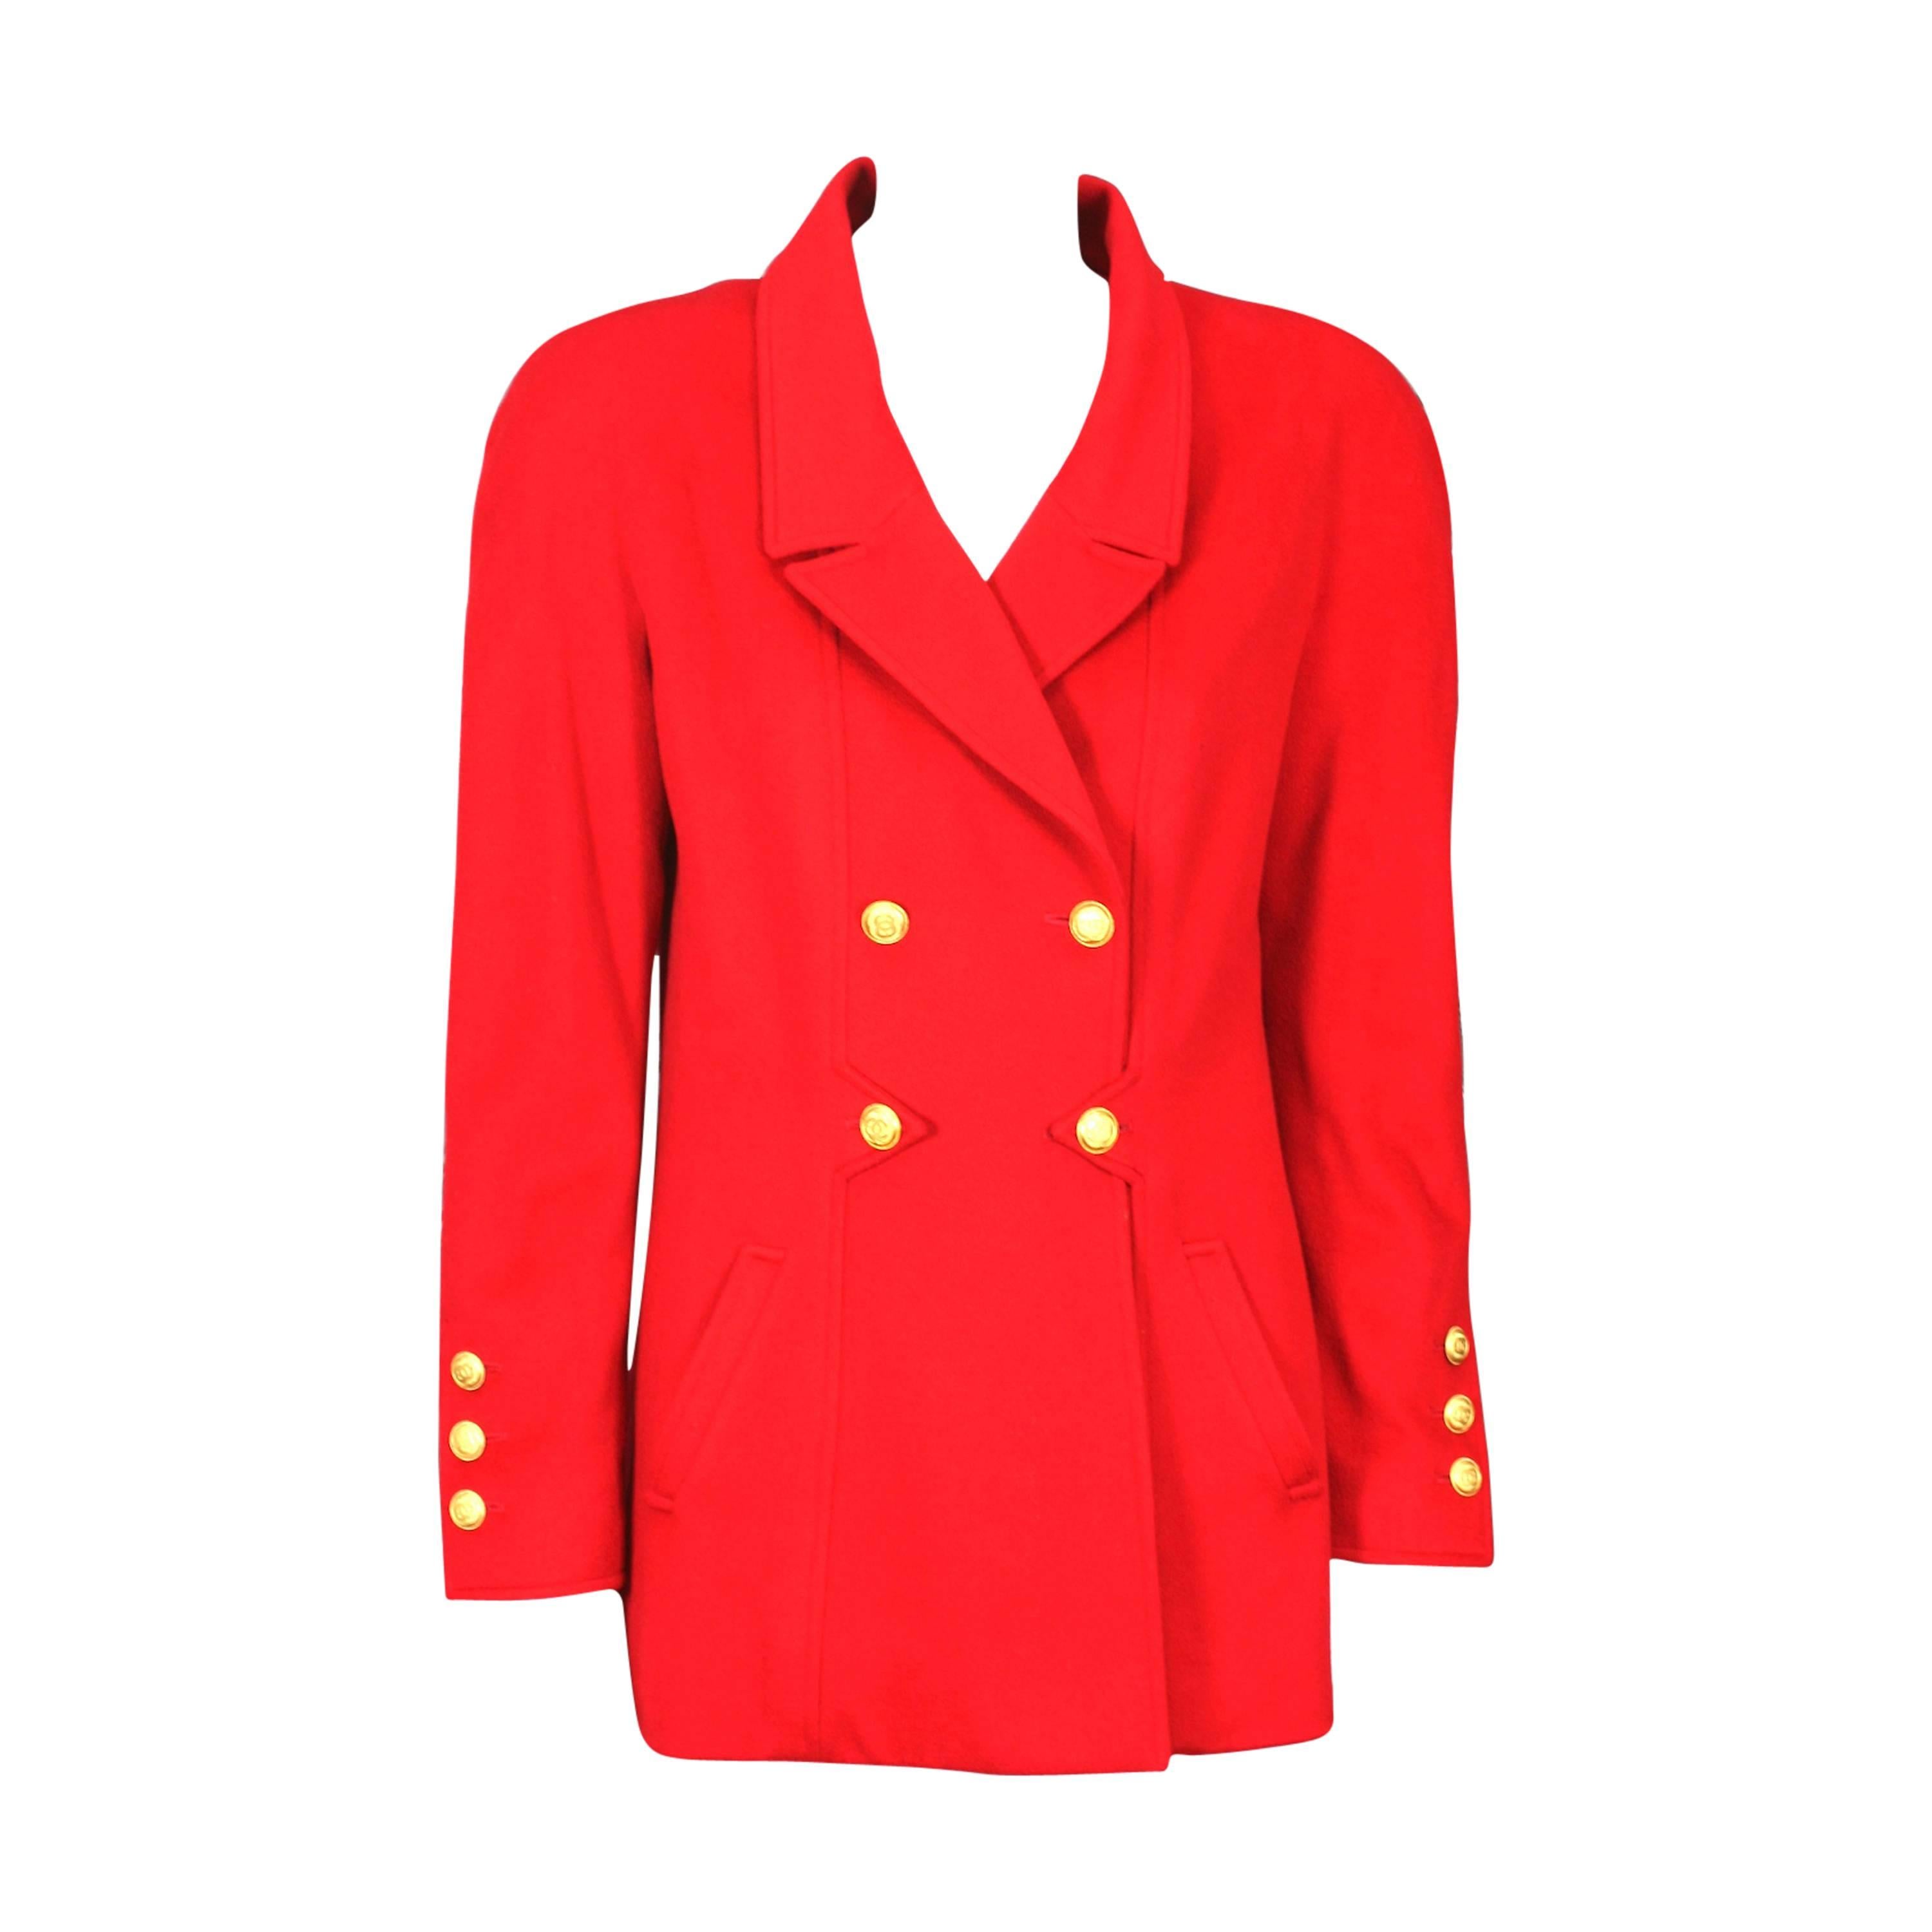 Chanel Red Cashmere Jacket